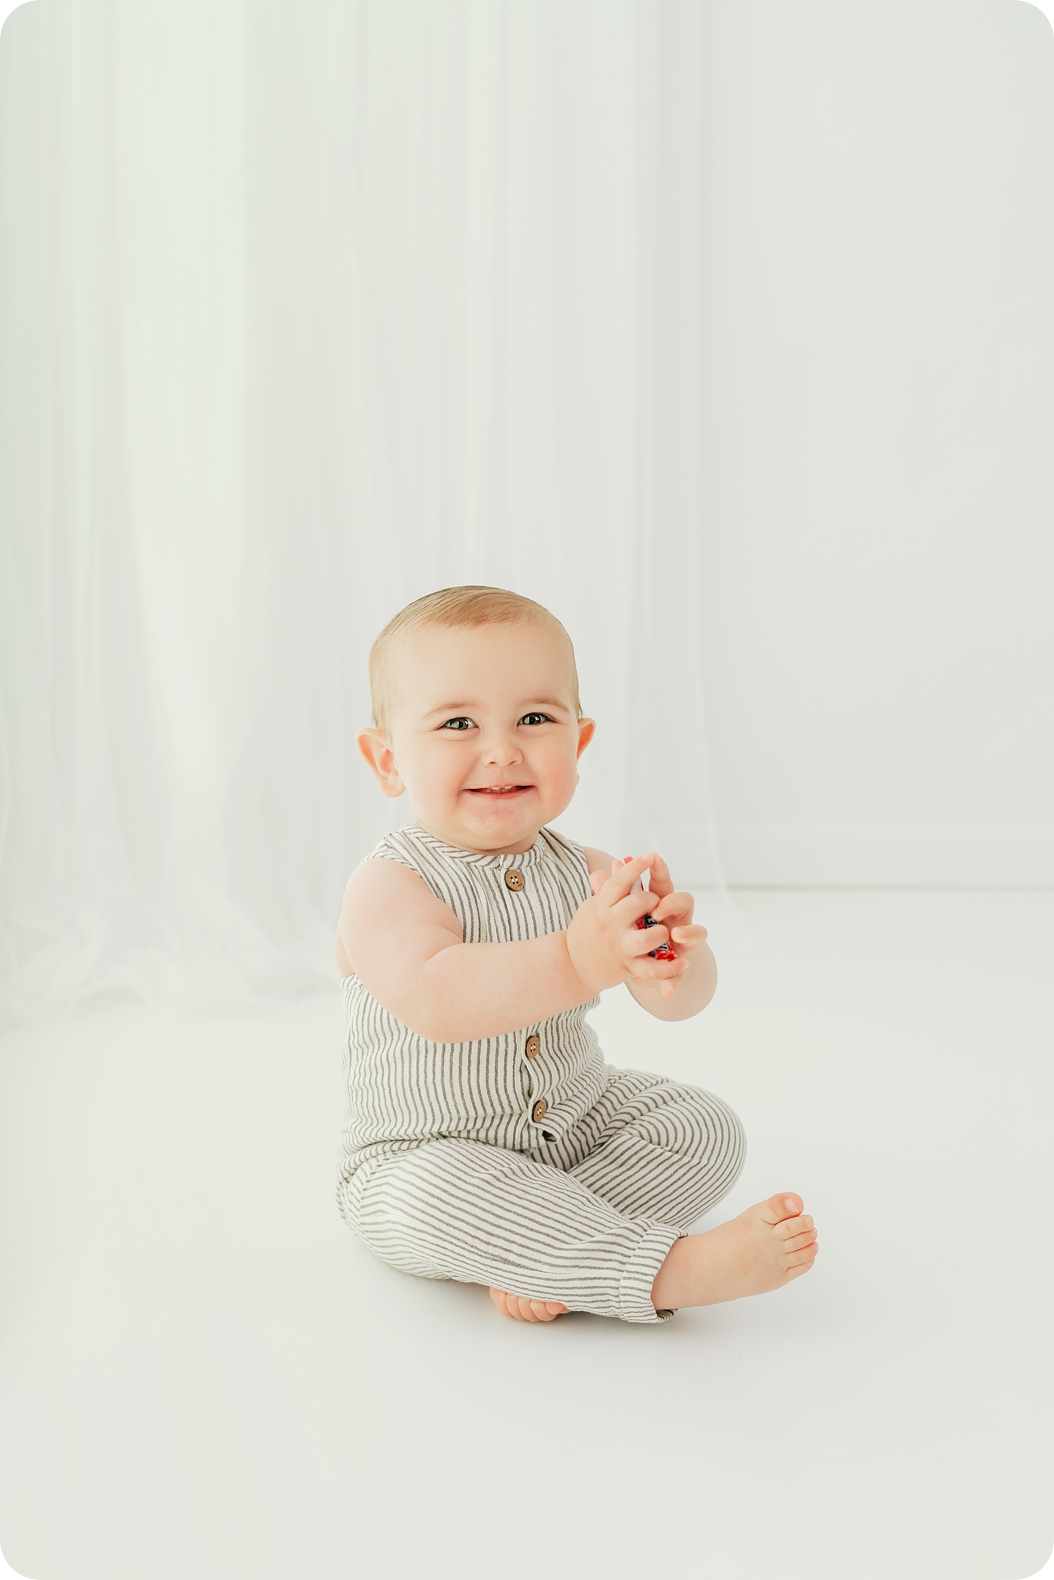 baby plays with candy in studio during birthday photos 